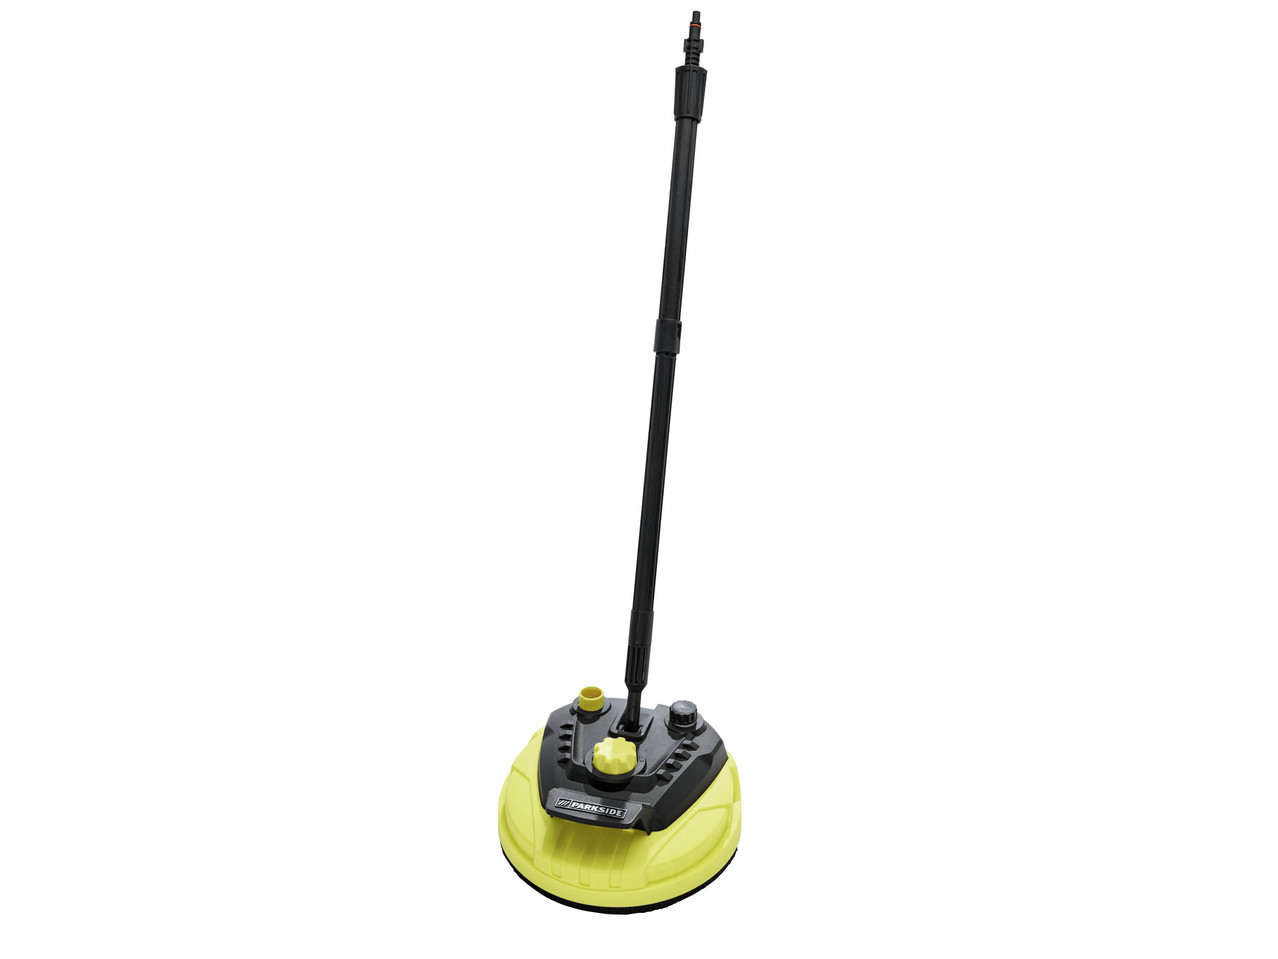 PARKSIDE Surface Cleaner/Power Scrubber Attachment